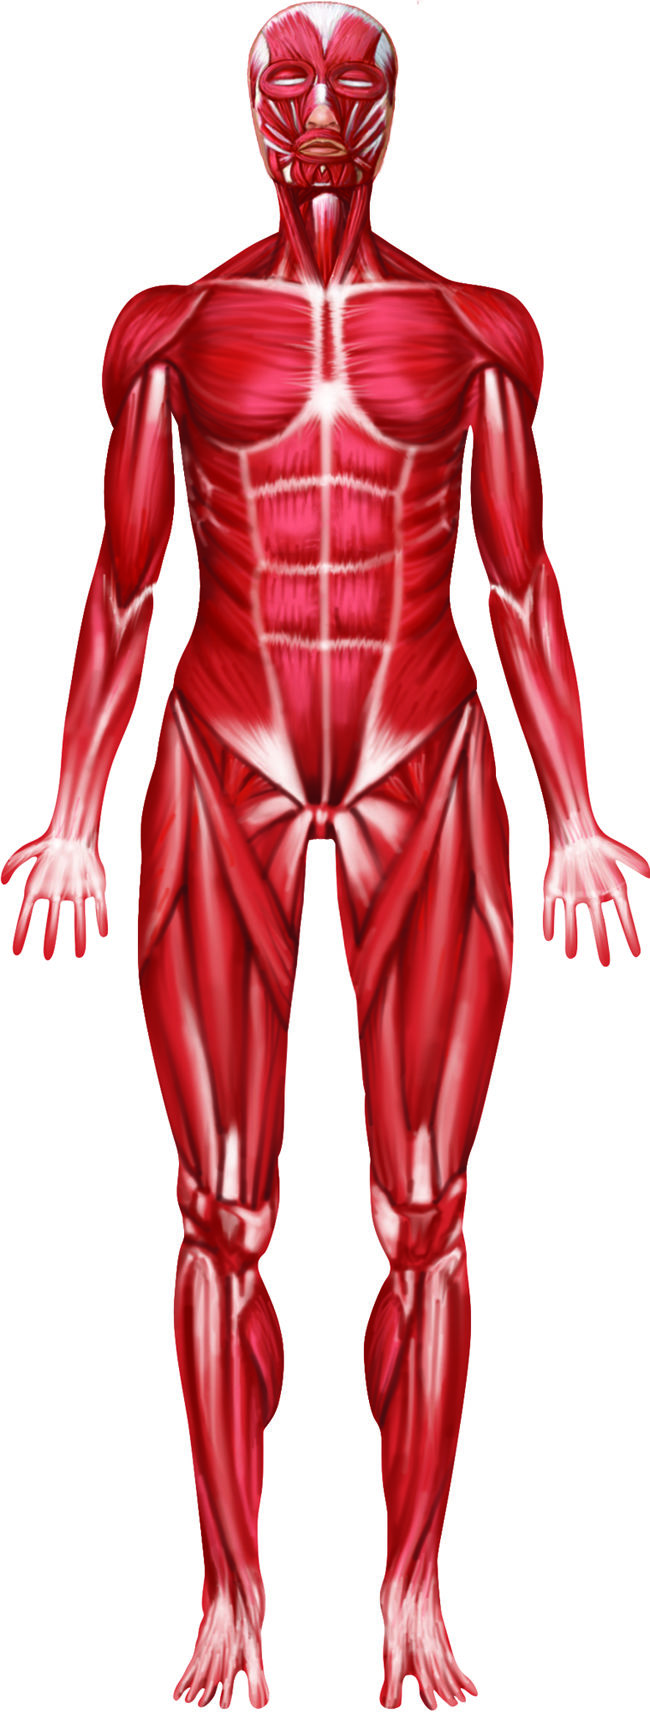 Labelled Muscles In The Body 654 Best Images About Muscle Anatomy On